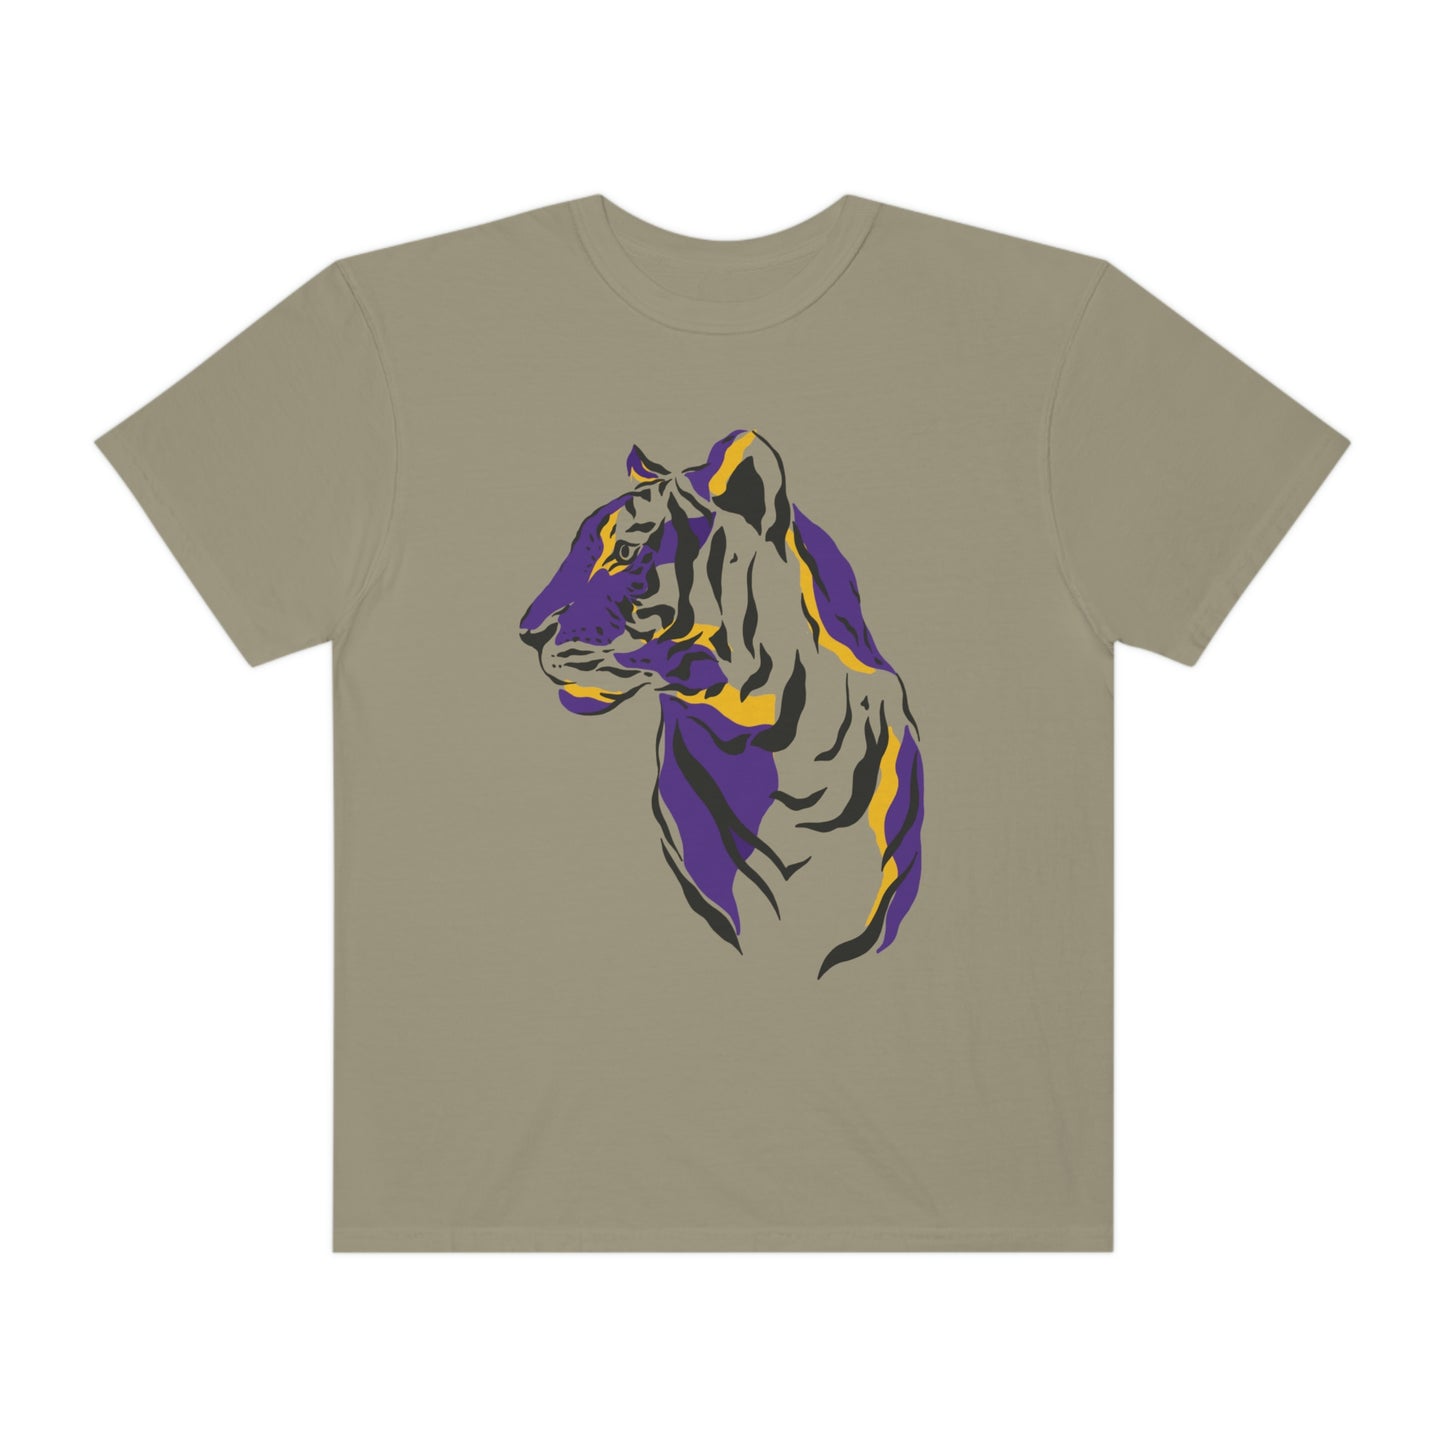 Tiger Graphic Tee